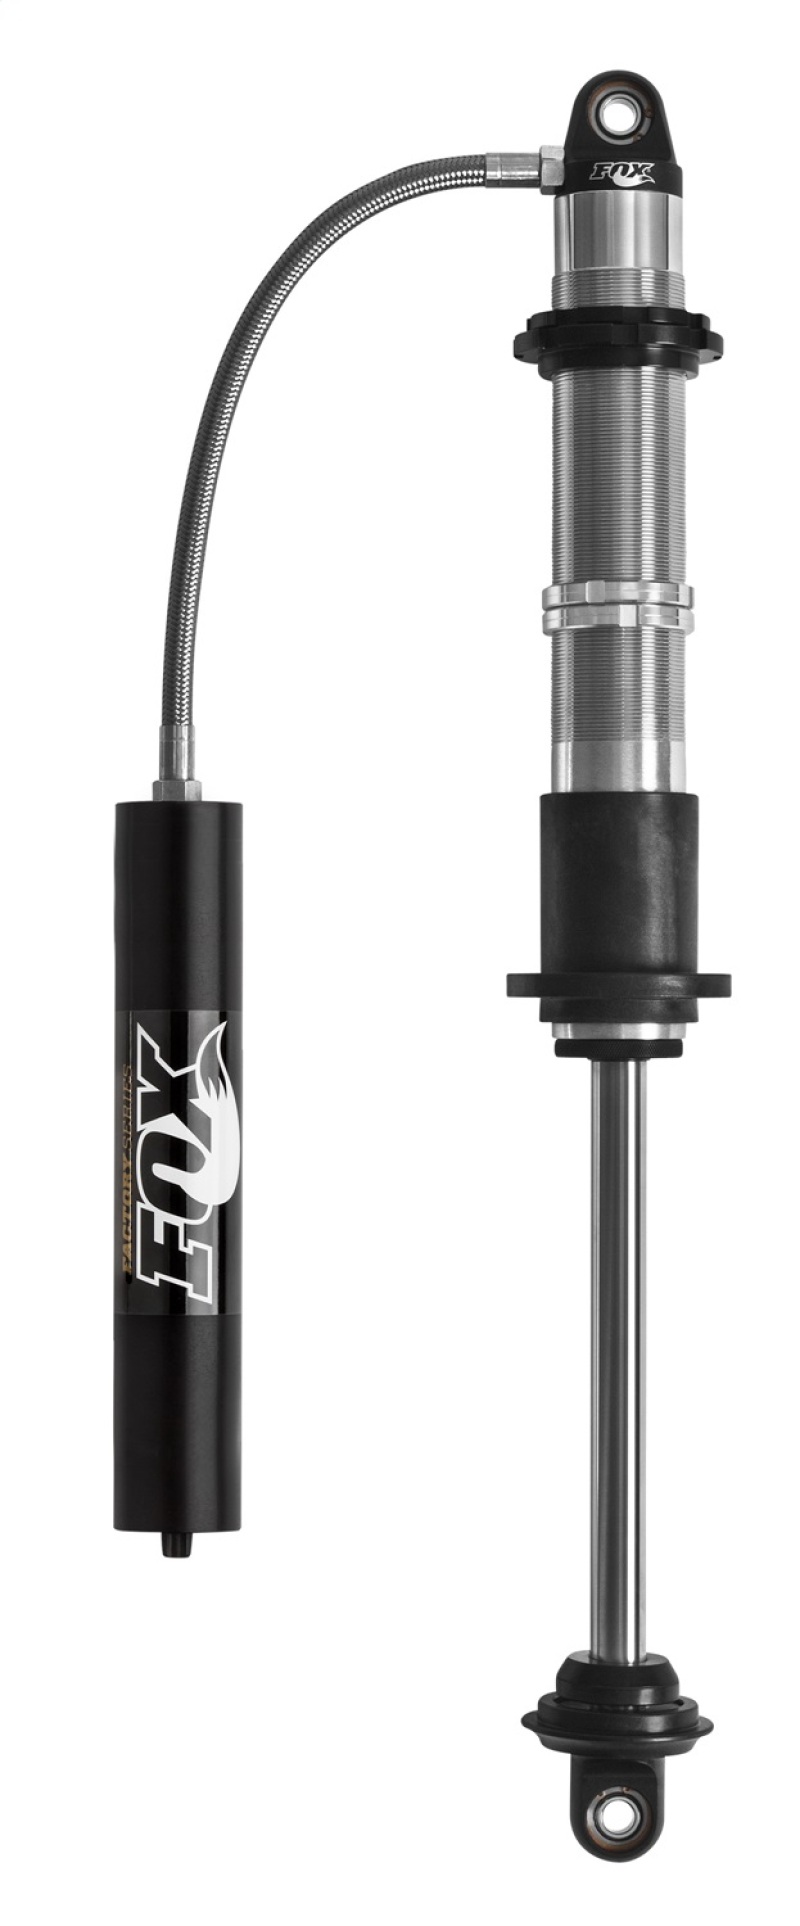 Fox 2.0 Factory Series 16in. Remote Reservoir Coilover Shock 7/8in. Shaft (50/70) - Blk - 980-02-059